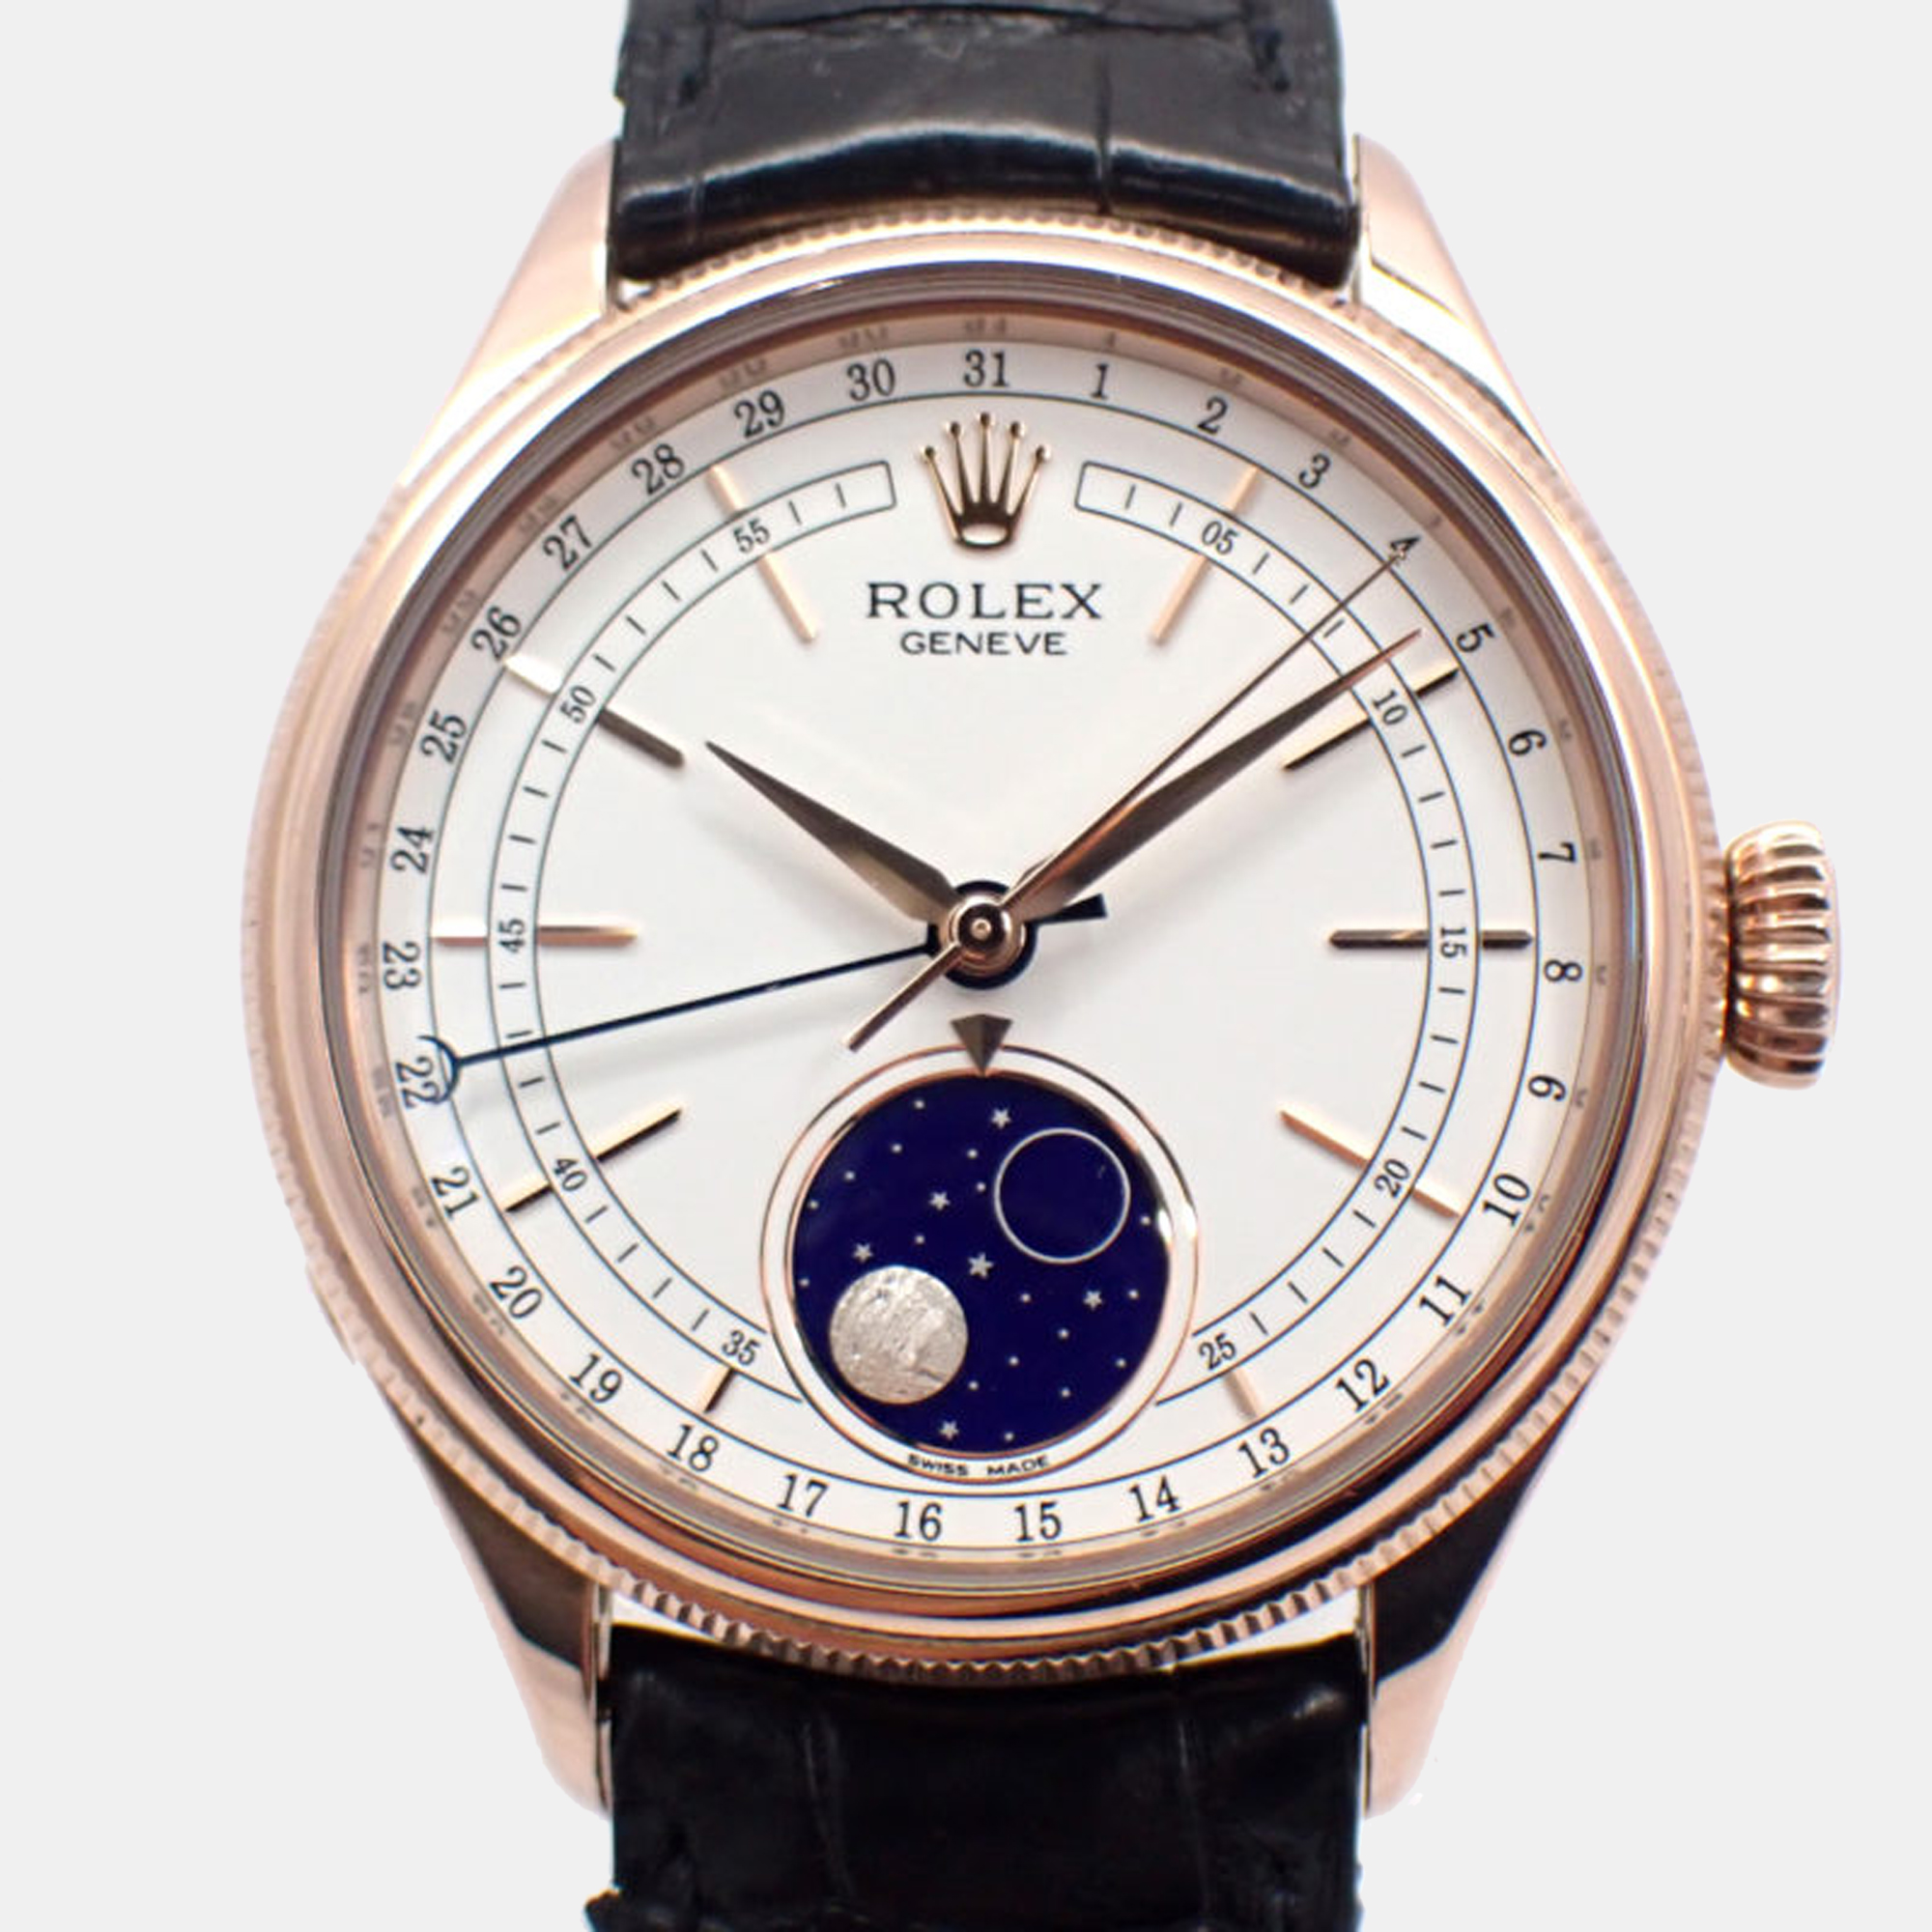 Rolex white everose gold cellini rolex cellini moon phase 50535 watch 36 mm